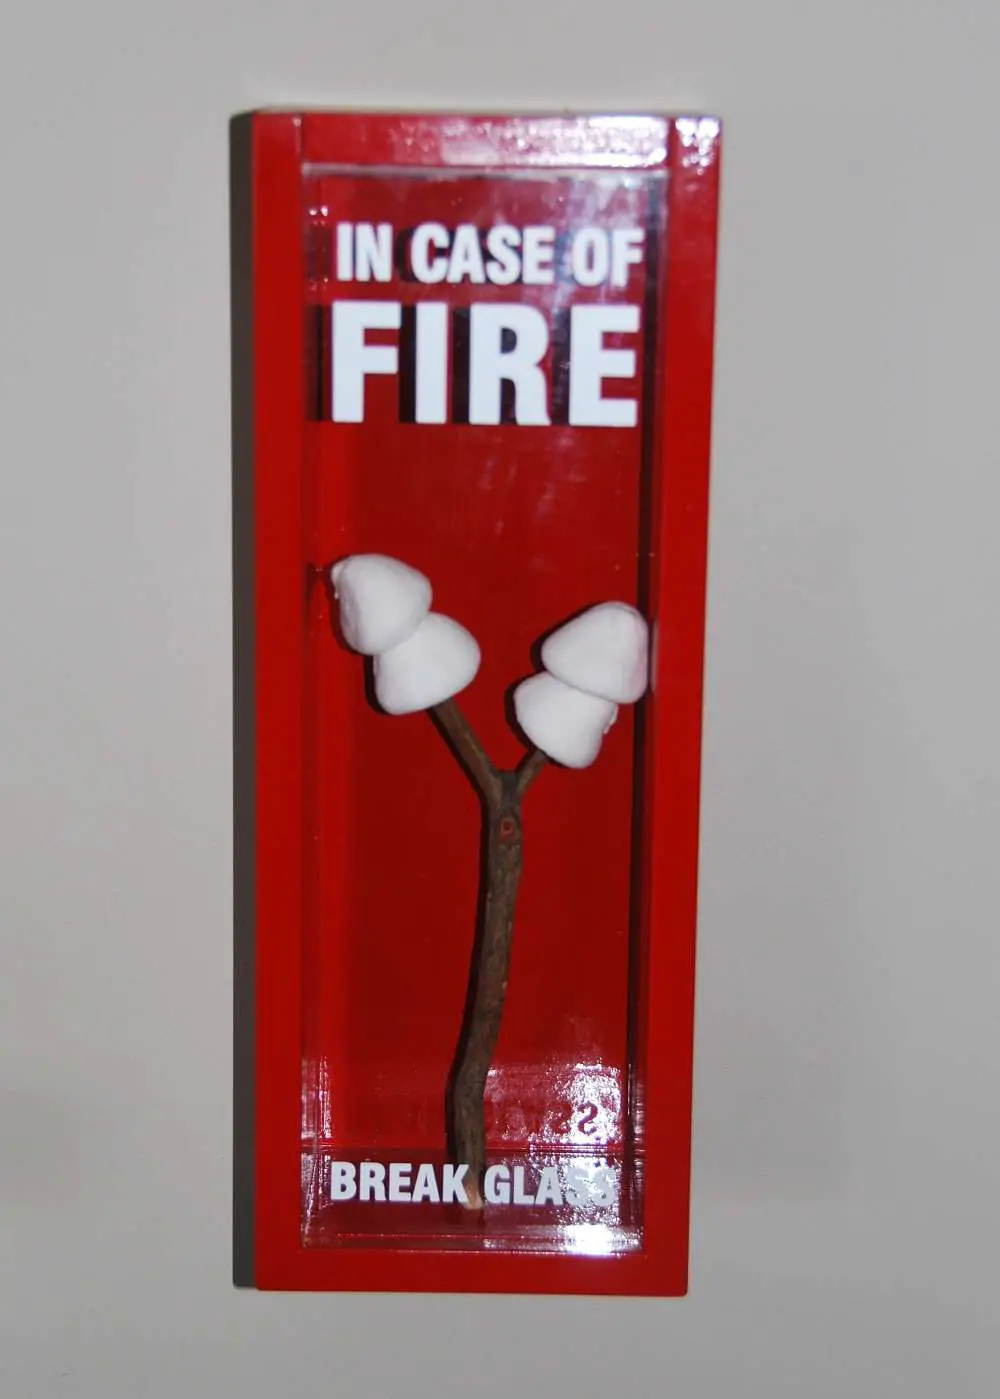 In Case Of Fire | Oceania Travel Blog | In Case Of Fire - Break Glass Here For... | Oceania Travel Blog | Author: Anthony Bianco - The Travel Tart Blog